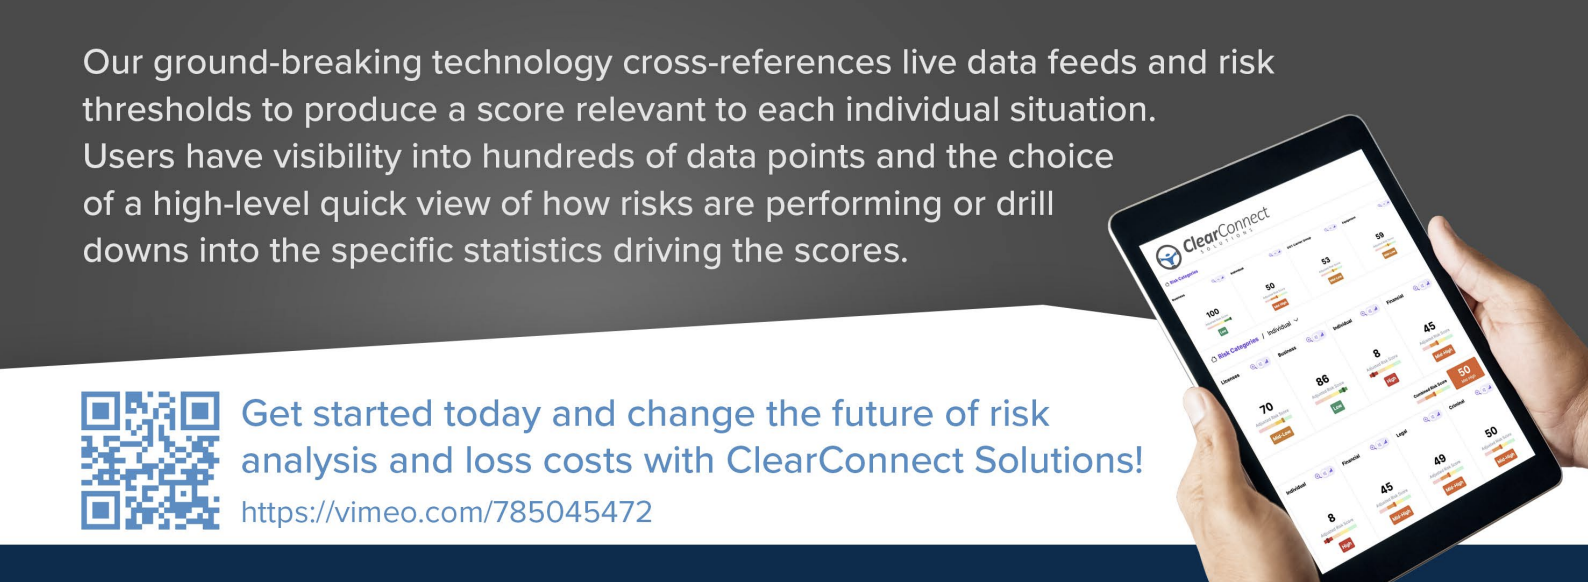 ClearConnect Solutions Risk Scoring Tool on iPad